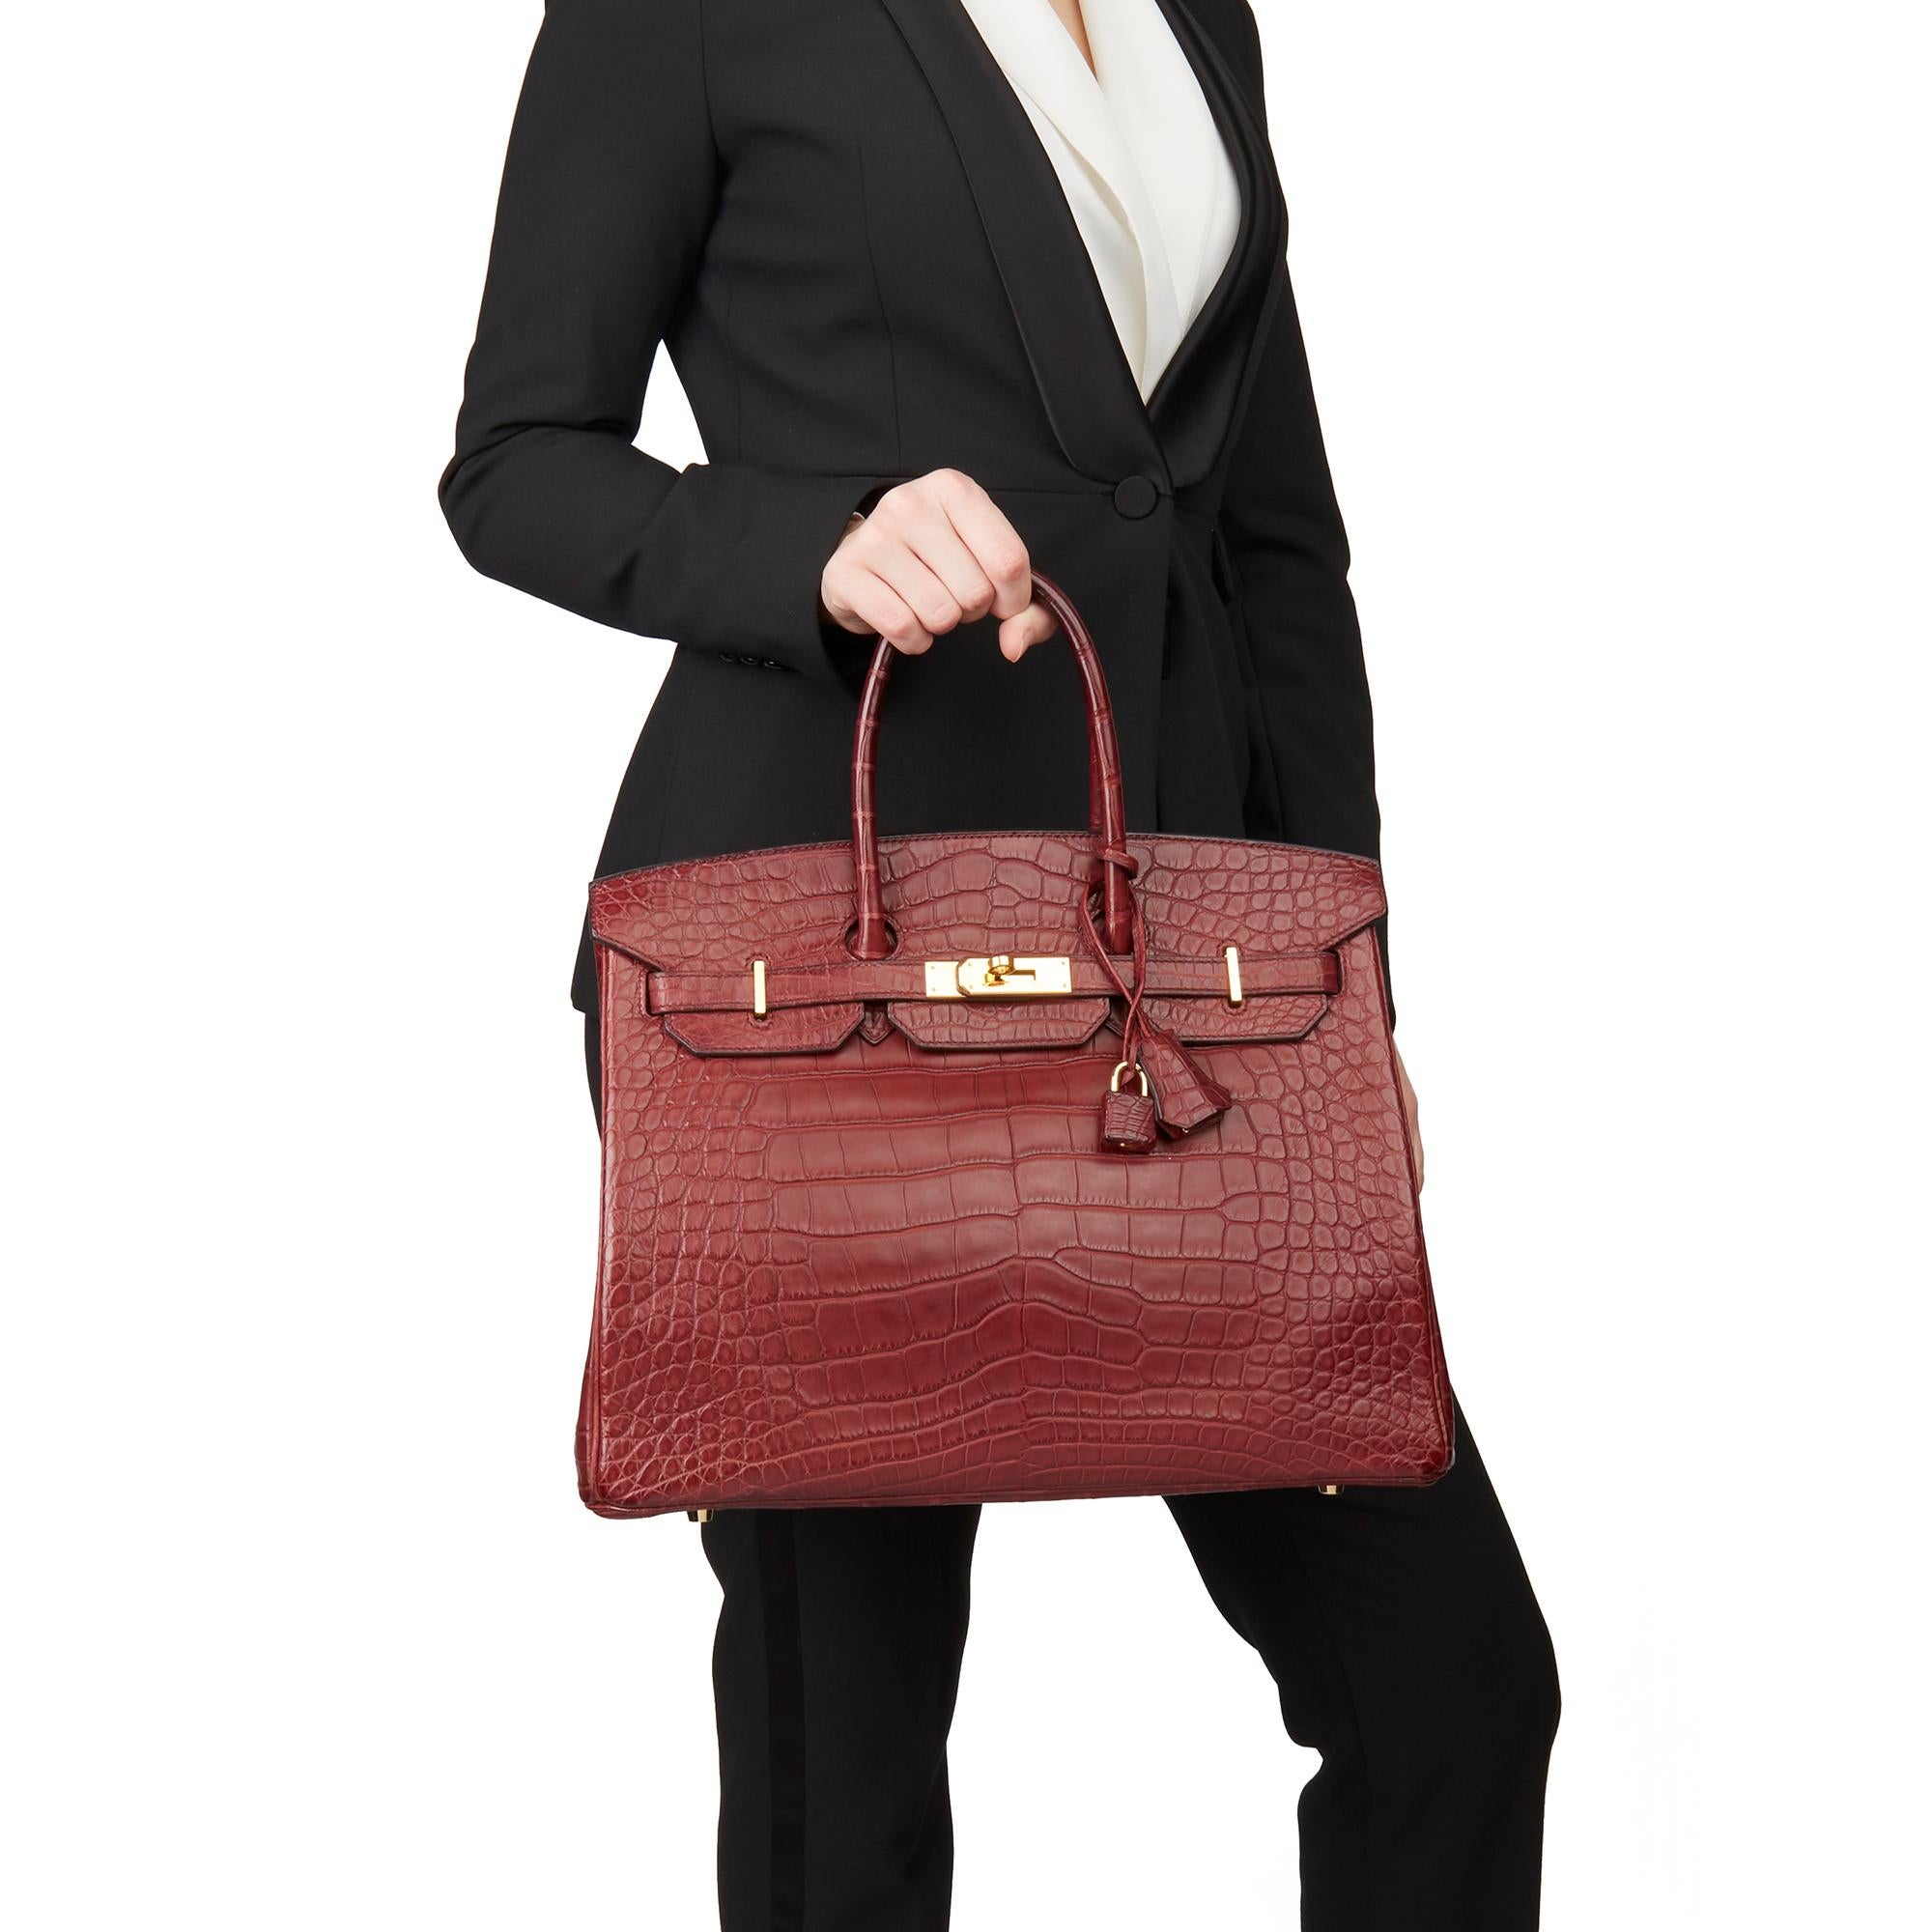 HERMÈS
Rouge H Matte Mississippiensis Alligator Leather Birkin 35cm

Xupes Reference: CB172
Serial Number: T
Age (Circa): 2015
Accompanied By: Hermès Dust Bag, Box, Lock, Keys, Clochette, Invoice, CITIES 2 X 2019 Twilly's
Authenticity Details: Date